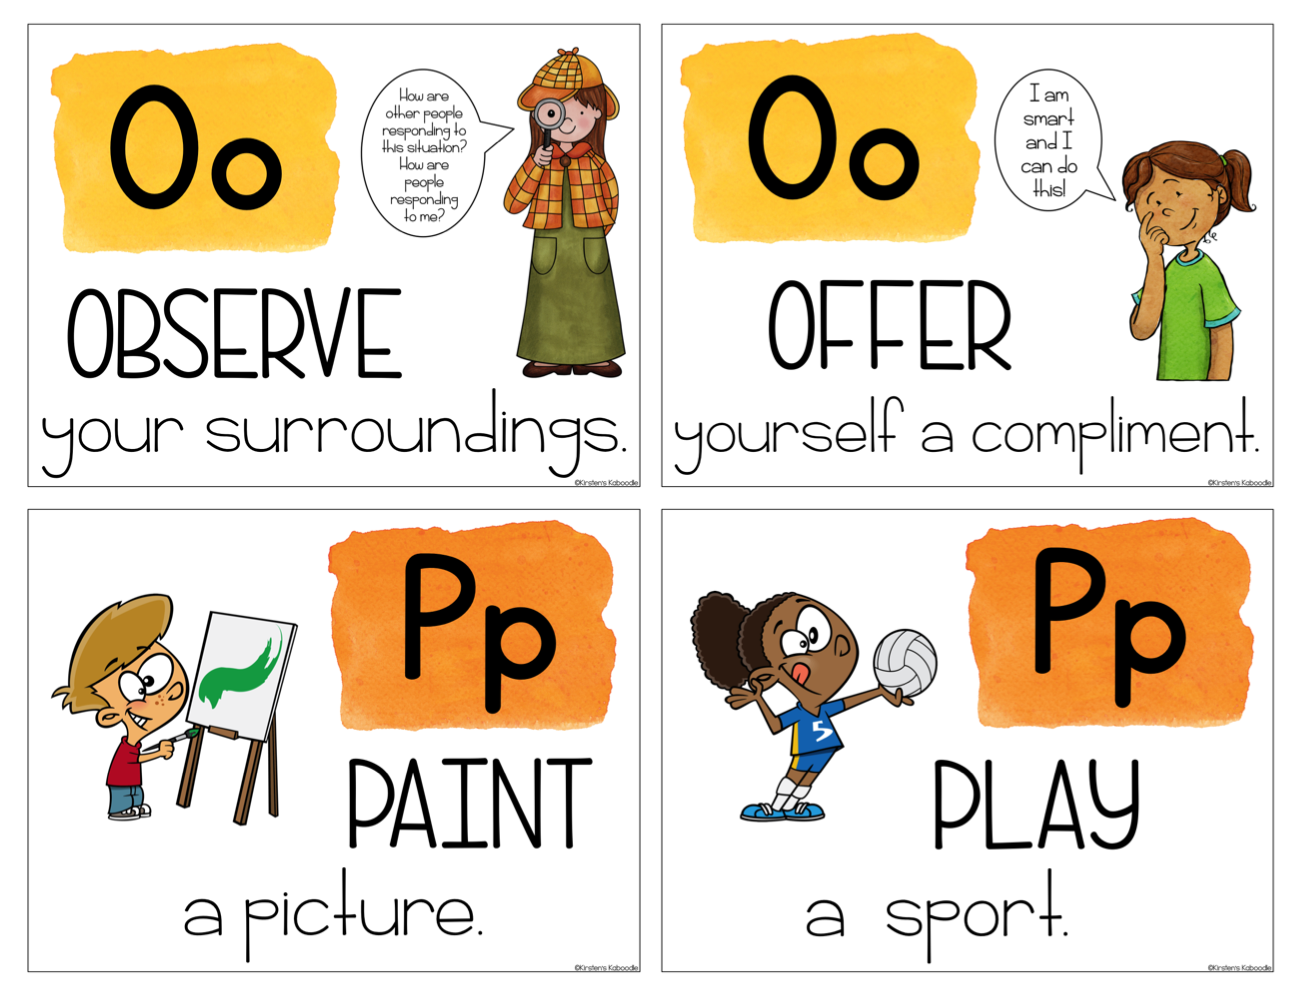 Coping Strategies Posters - The ABCs of Coping Strategies